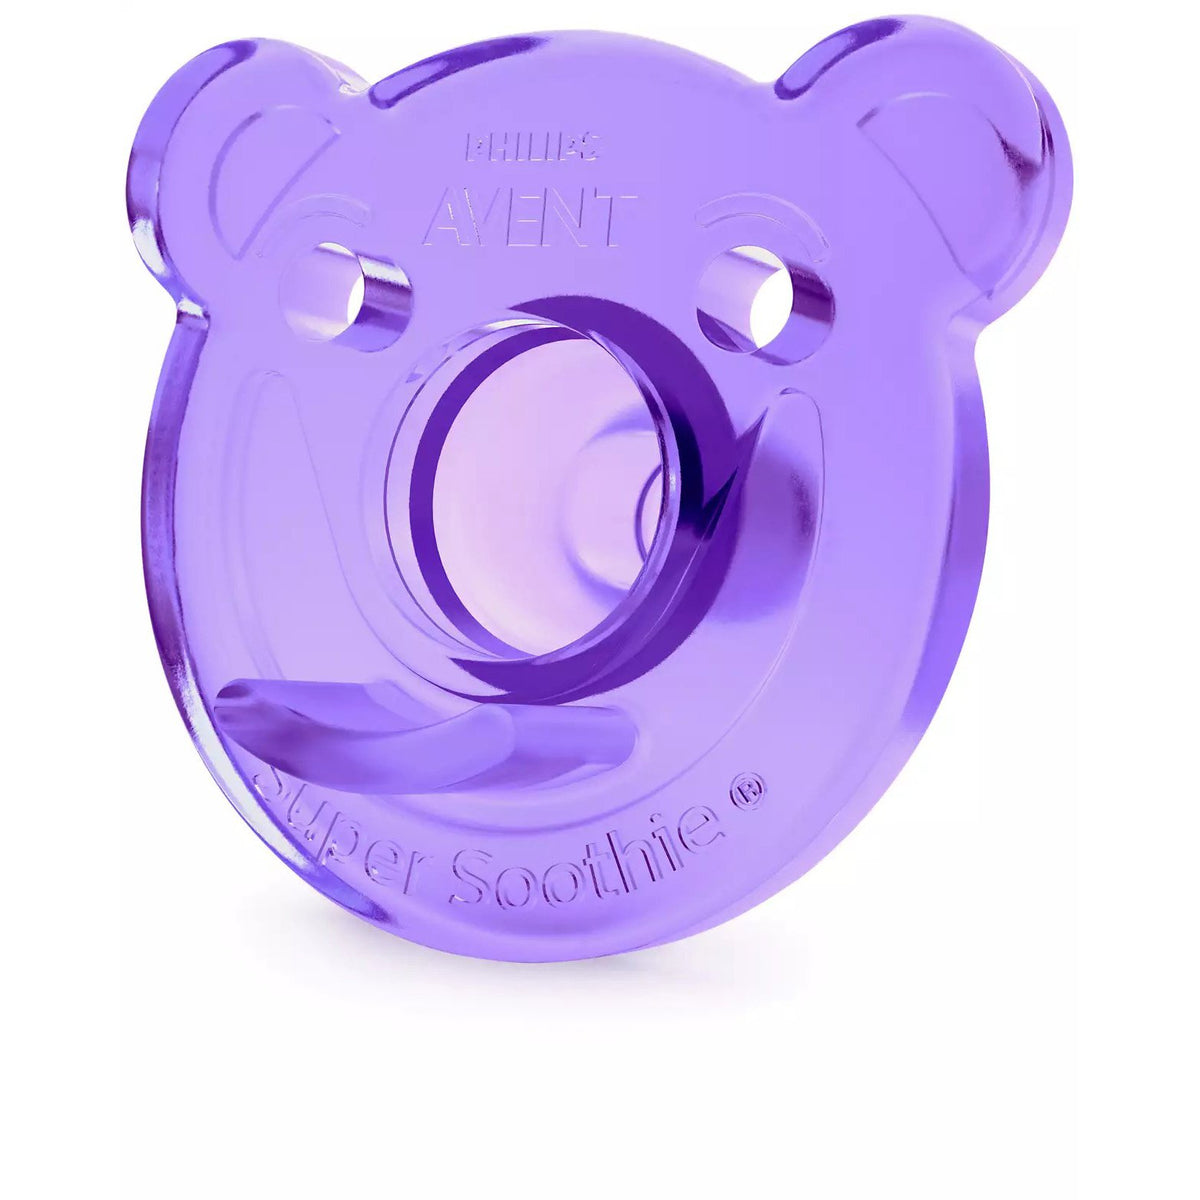 philips-avent-soothie-shapes-pacifier- (7)